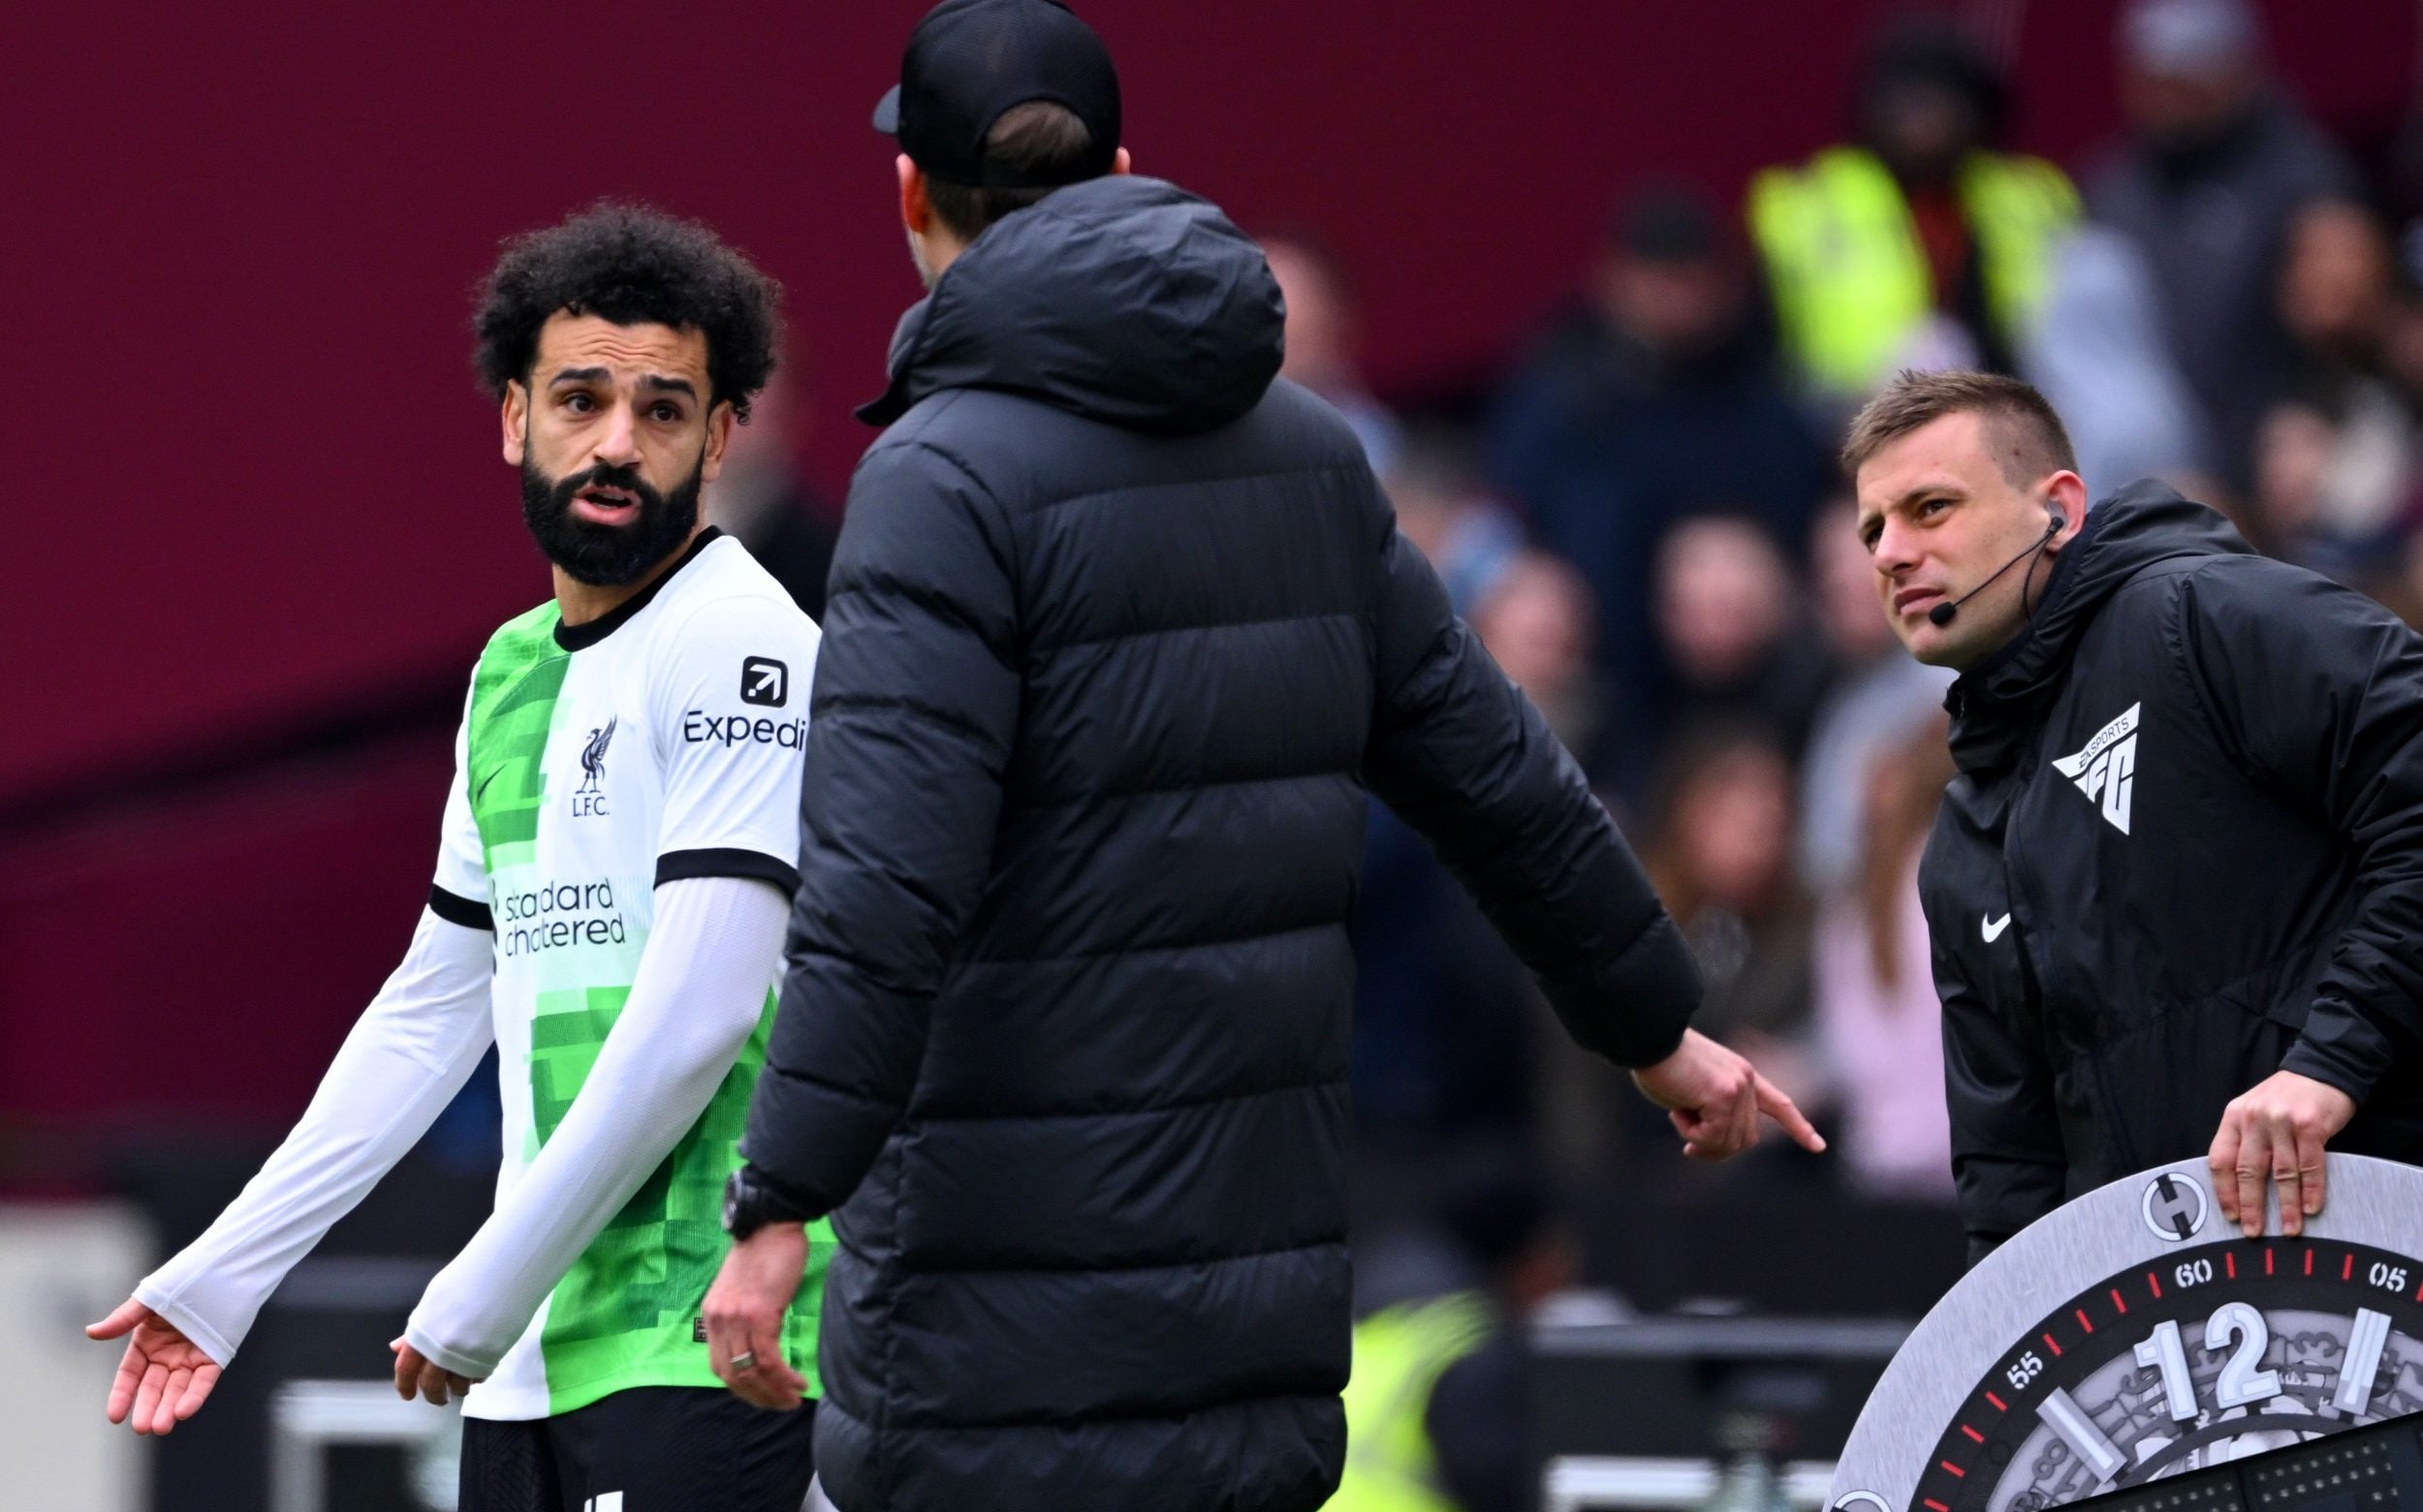 mohamed salah in extraordinary touchline row with jurgen klopp: ‘if i speak there will be fire’